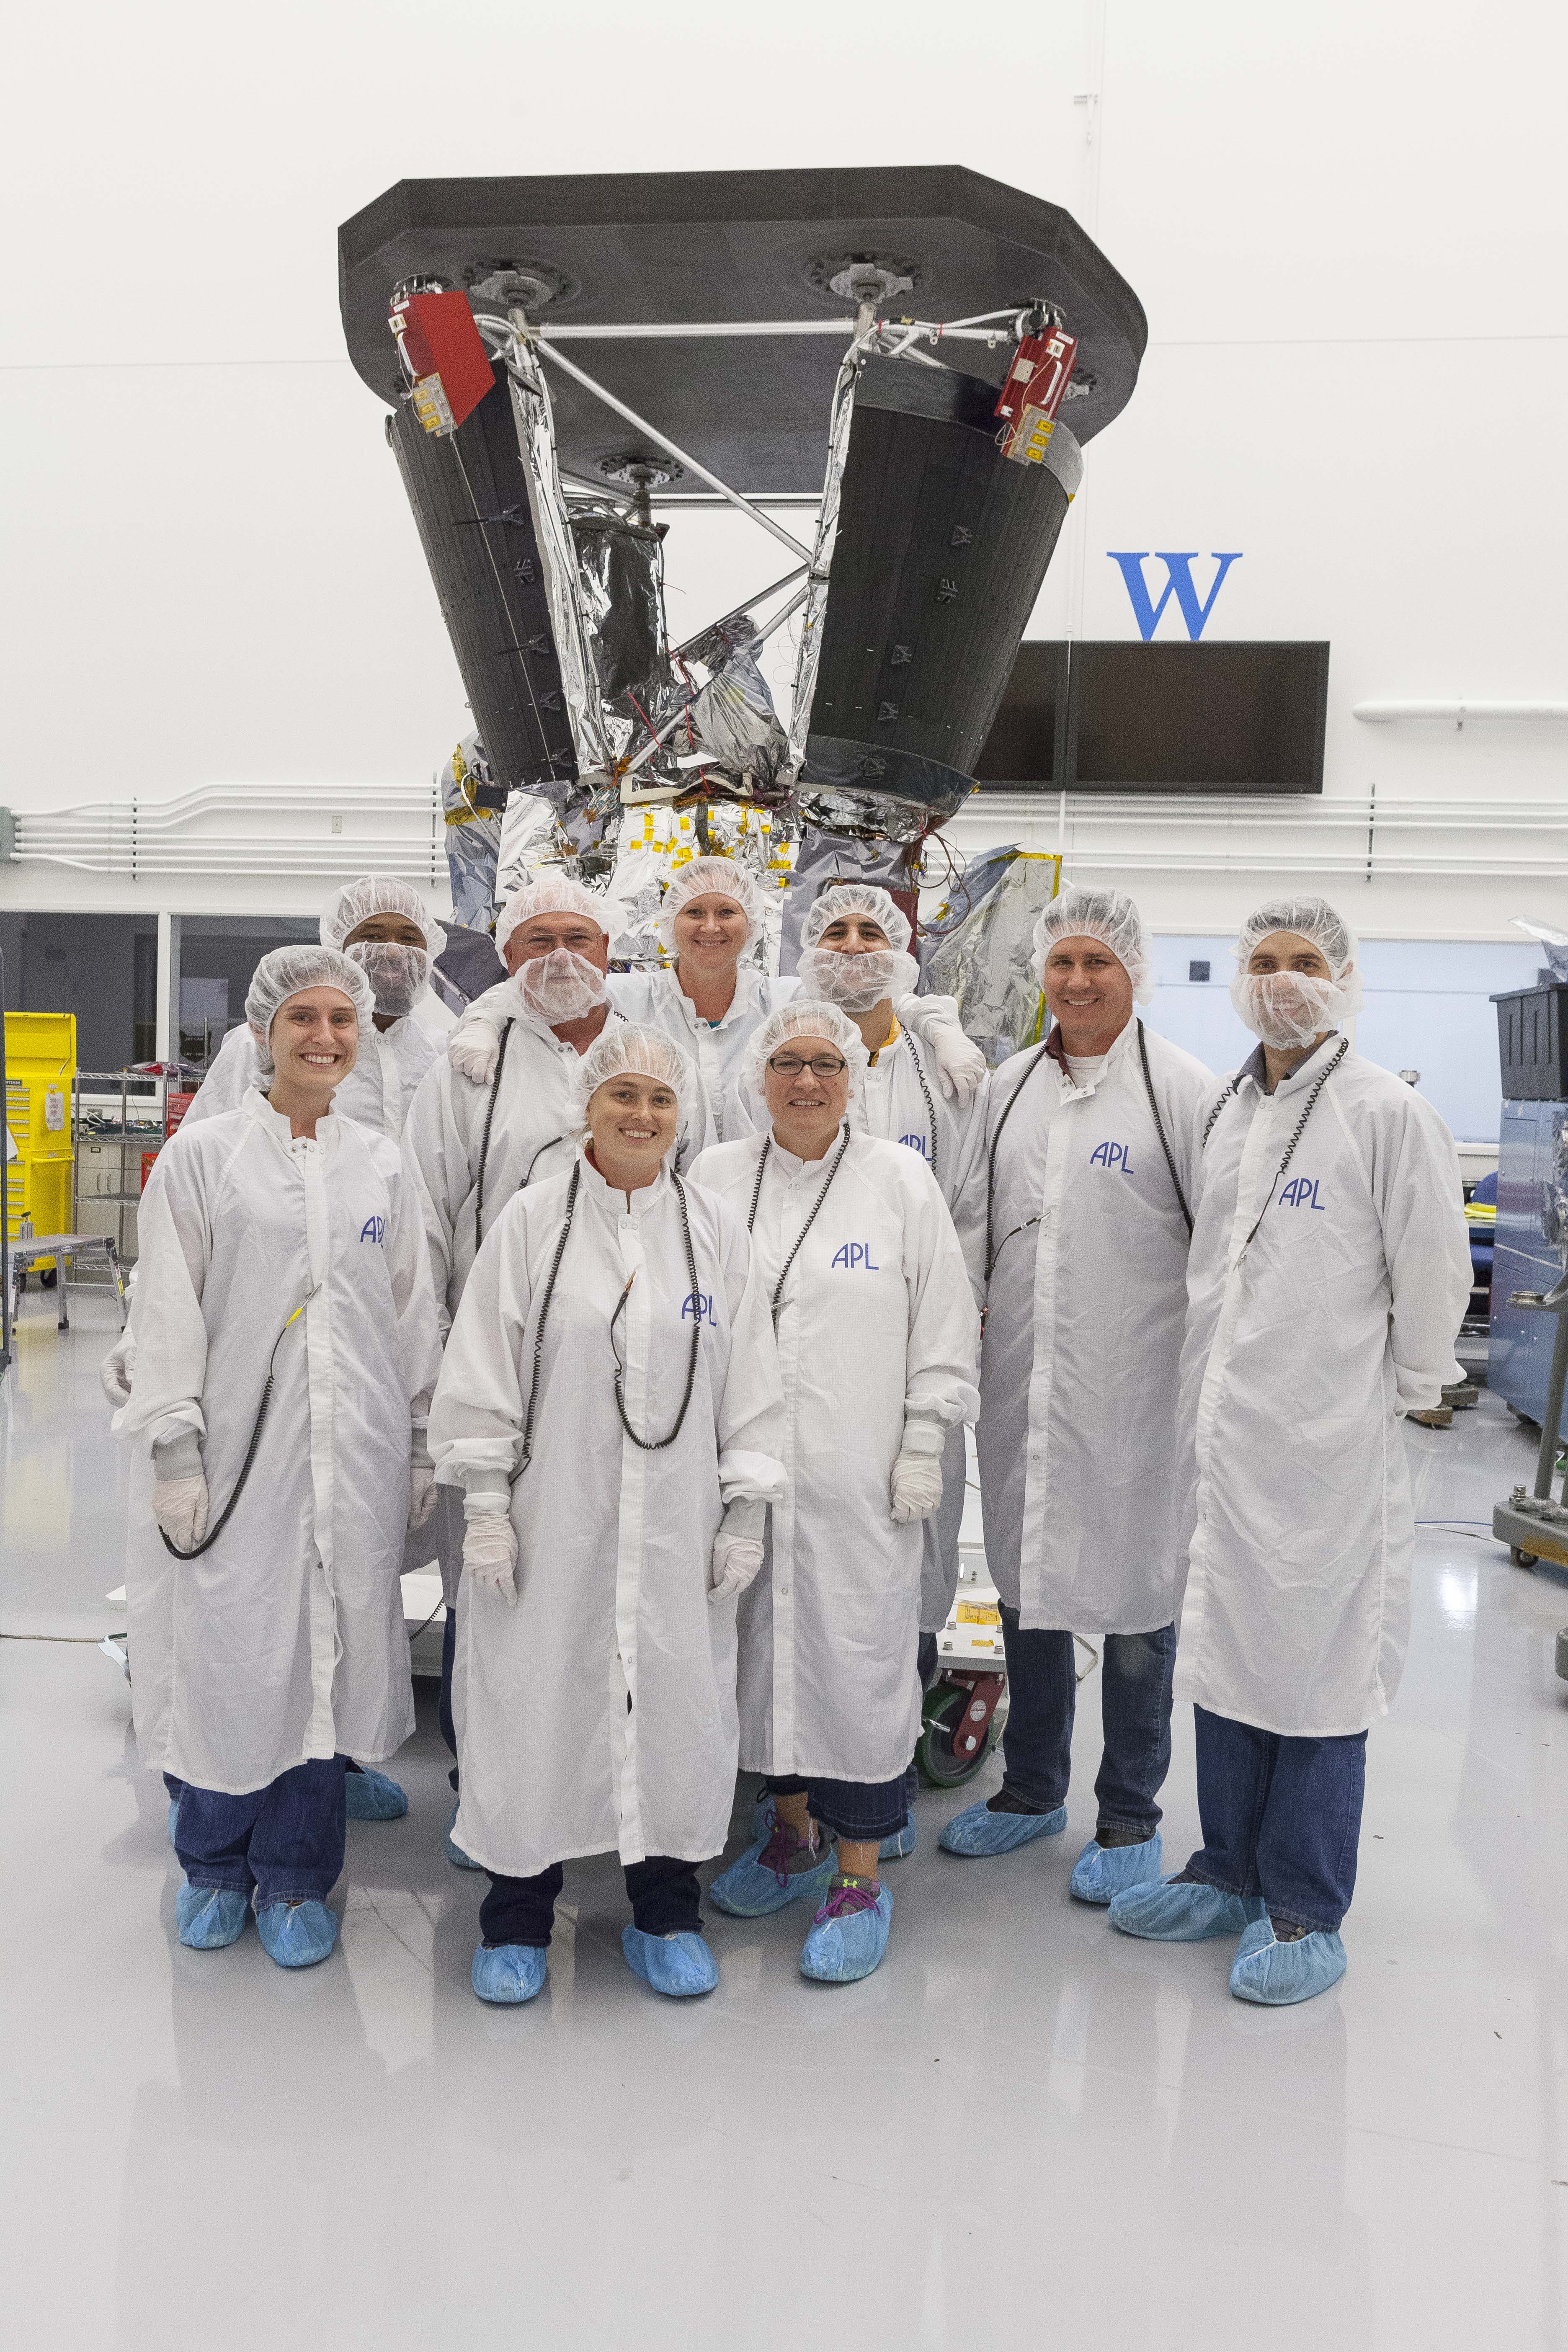 The TPS installation team from the Johns Hopkins University Applied Physics Laboratory in Laurel, Maryland,which installed the thermal protection system – the heat shield – onto the spacecraft for a test of alignment as part of integration and testing. 